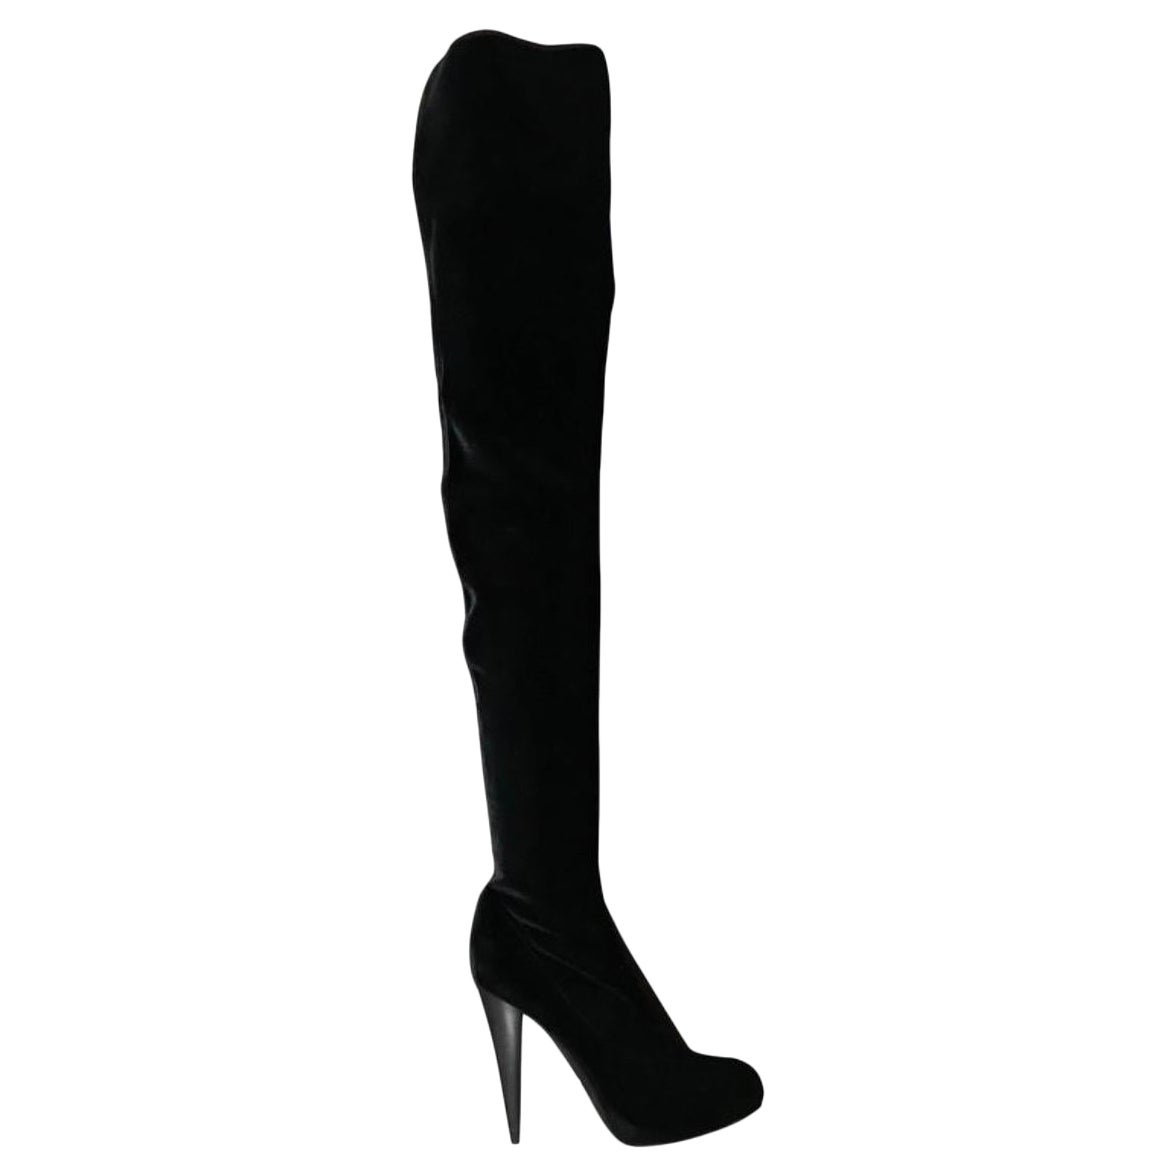 New Roberto Cavalli Black Stretch-Velvet Thigh High Boots Size 39 - 9 For Sale